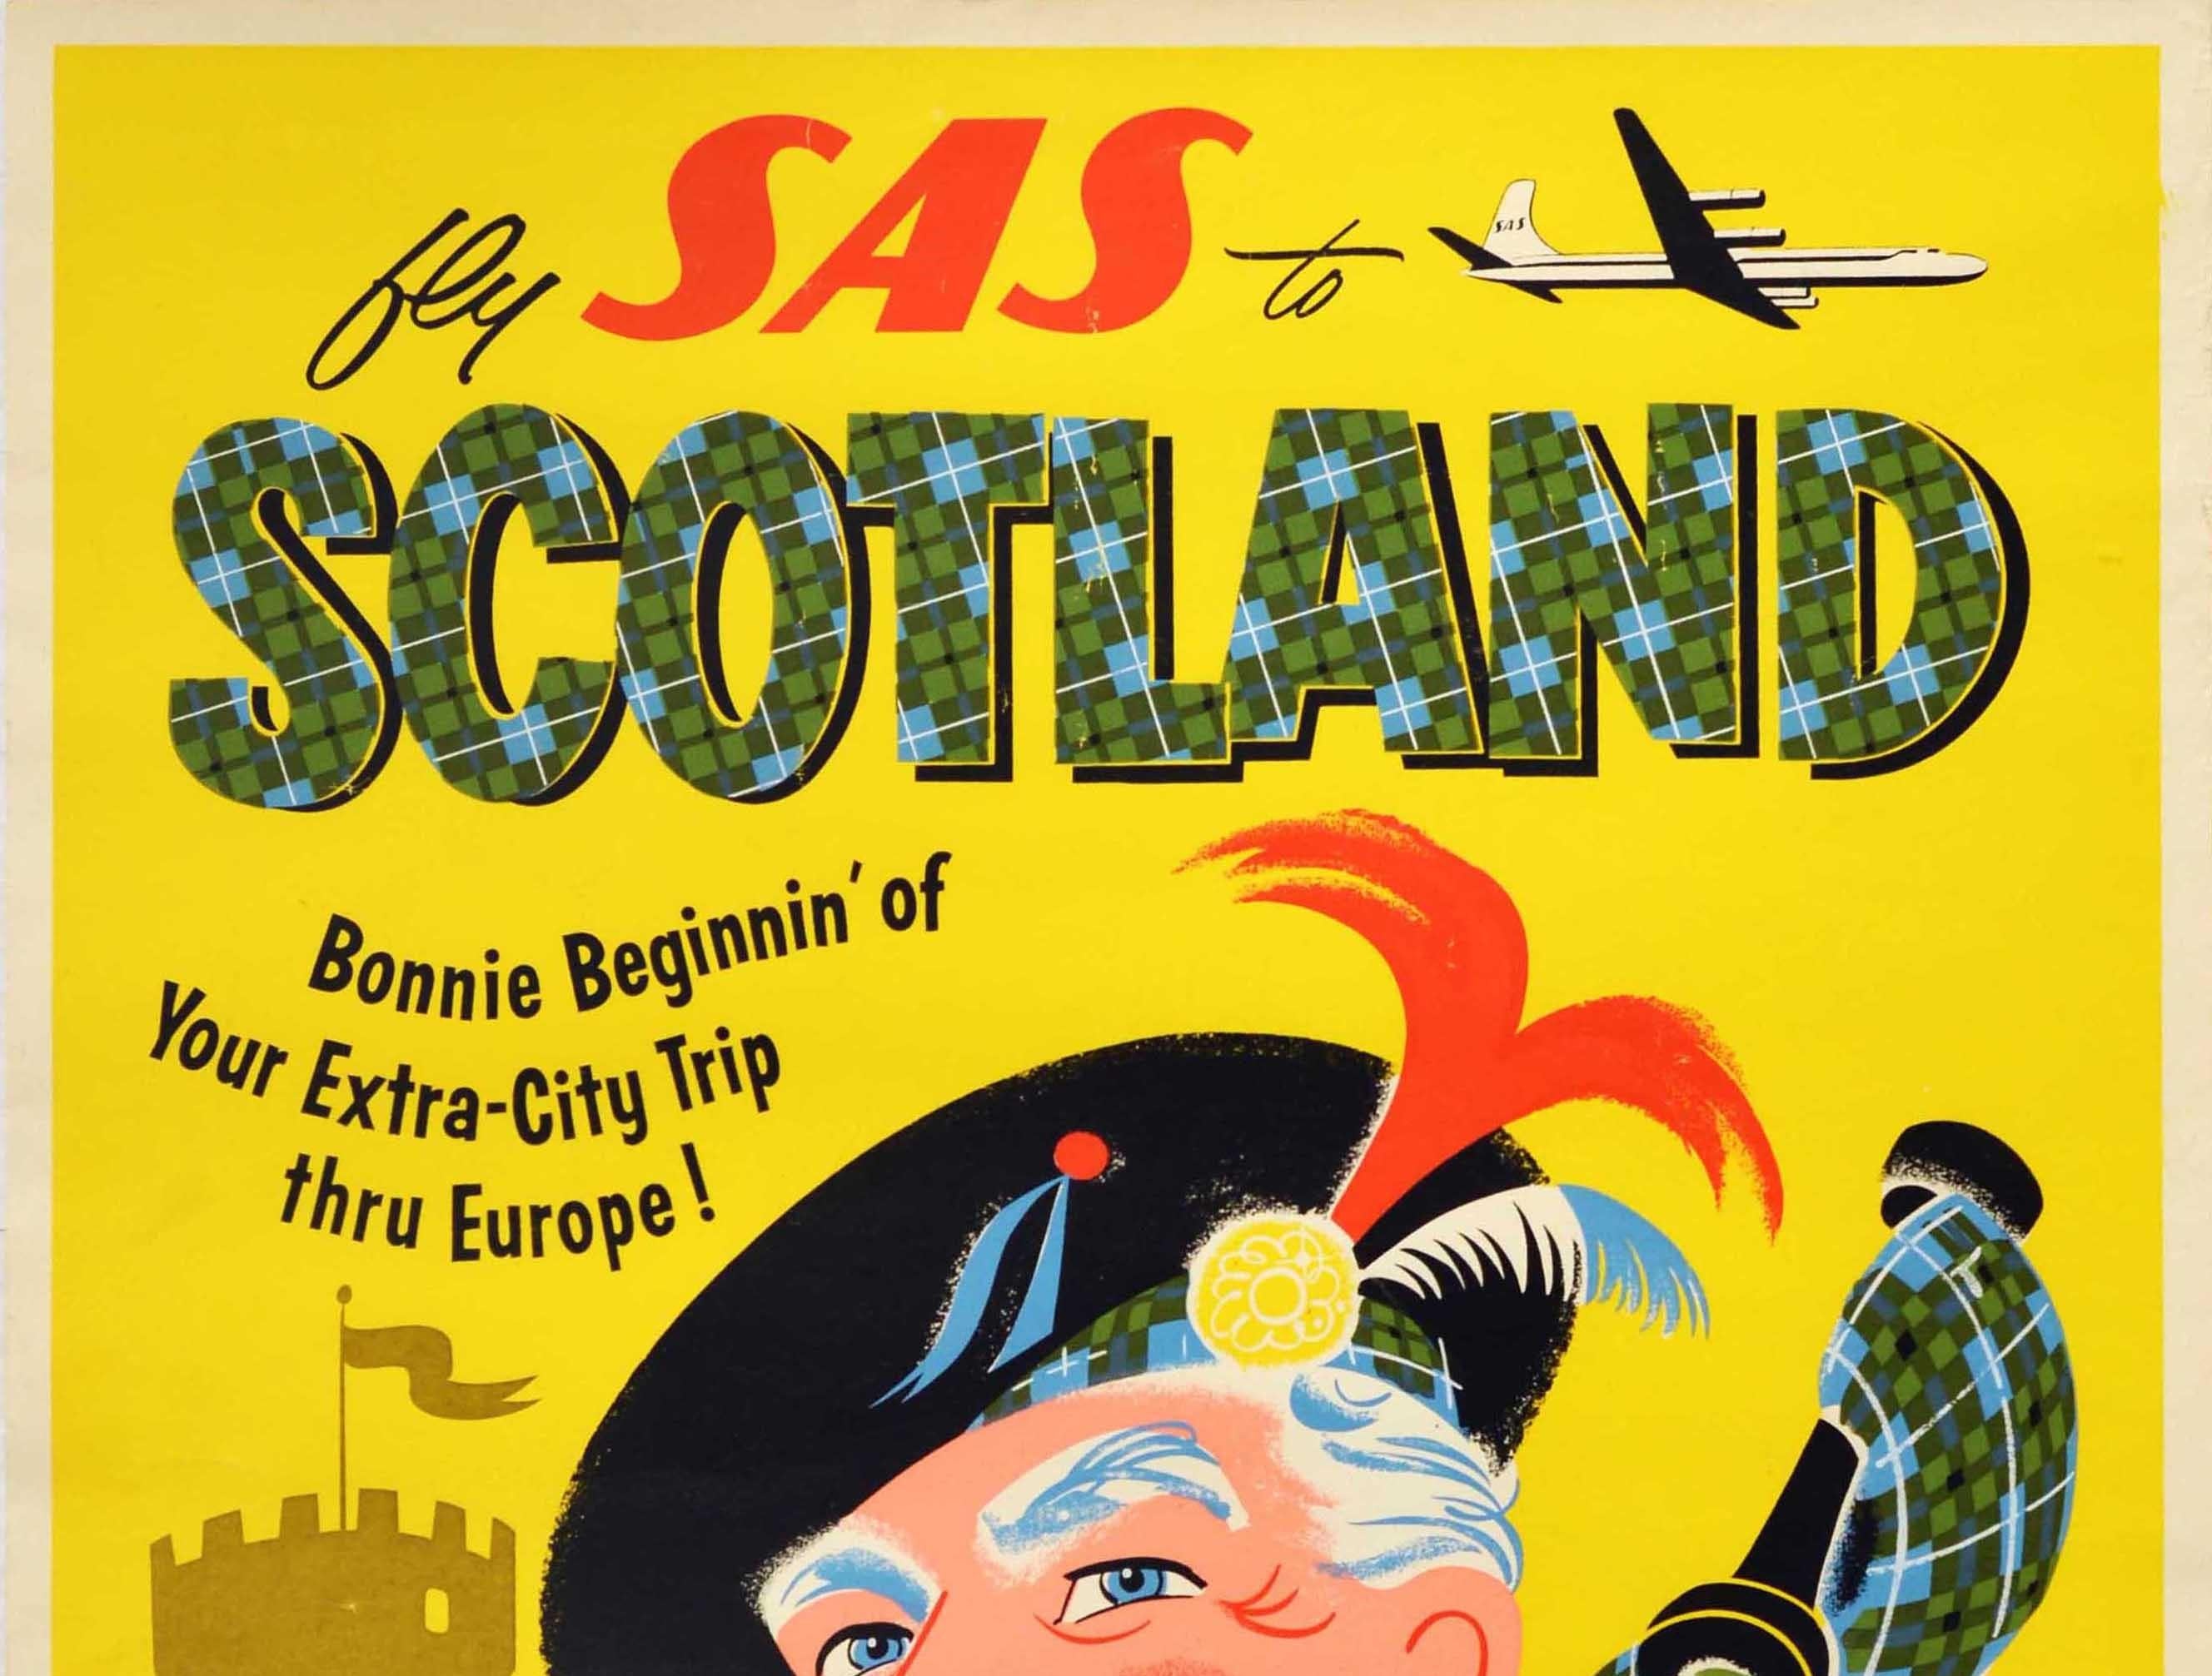 Original vintage travel advertising poster - Fly SAS to Scotland Bonnie Beginnin' of your extra-city trip thru Europe! - featuring a fun and colourful image of an old man with a grey moustache playing bagpipes in front of a castle with a plane